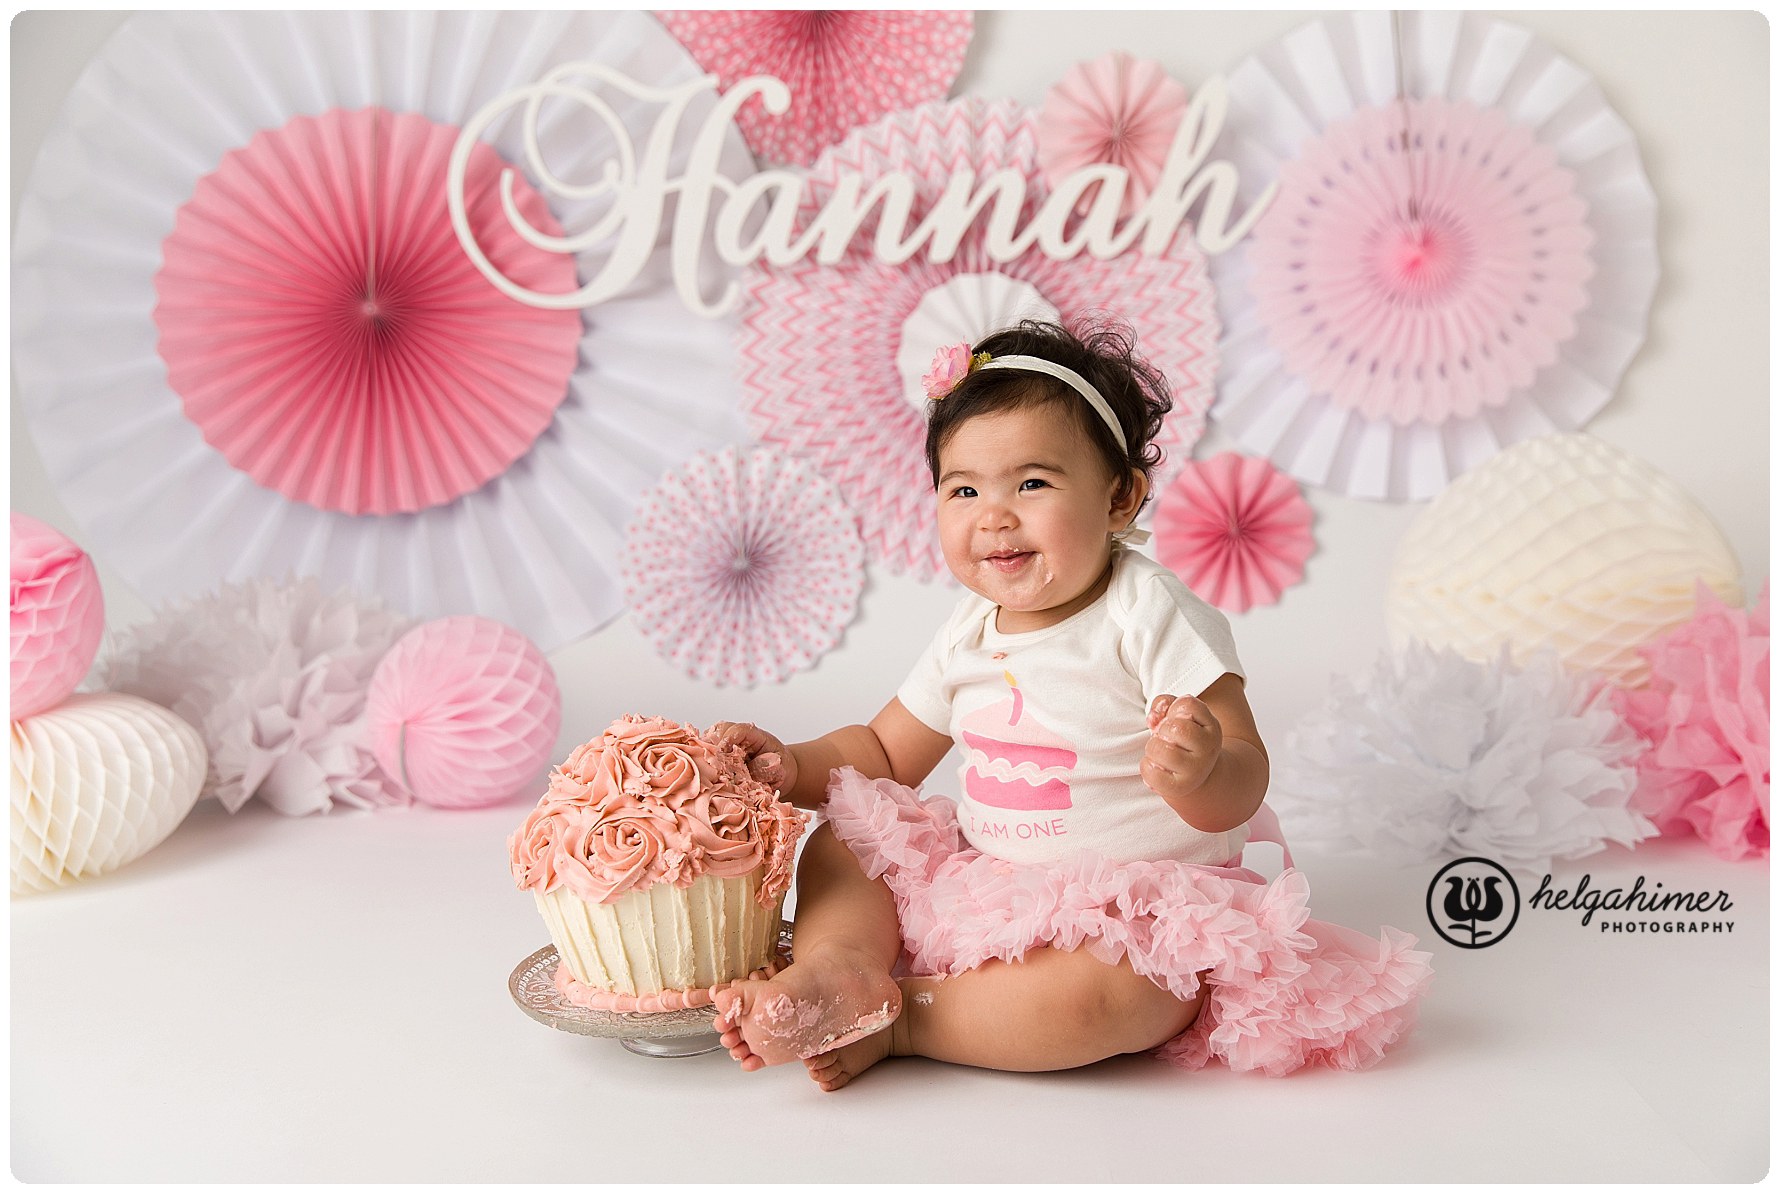 cake smash session for a chines little girl in pink, the background have pinwheels and she is wearing a pink tutu